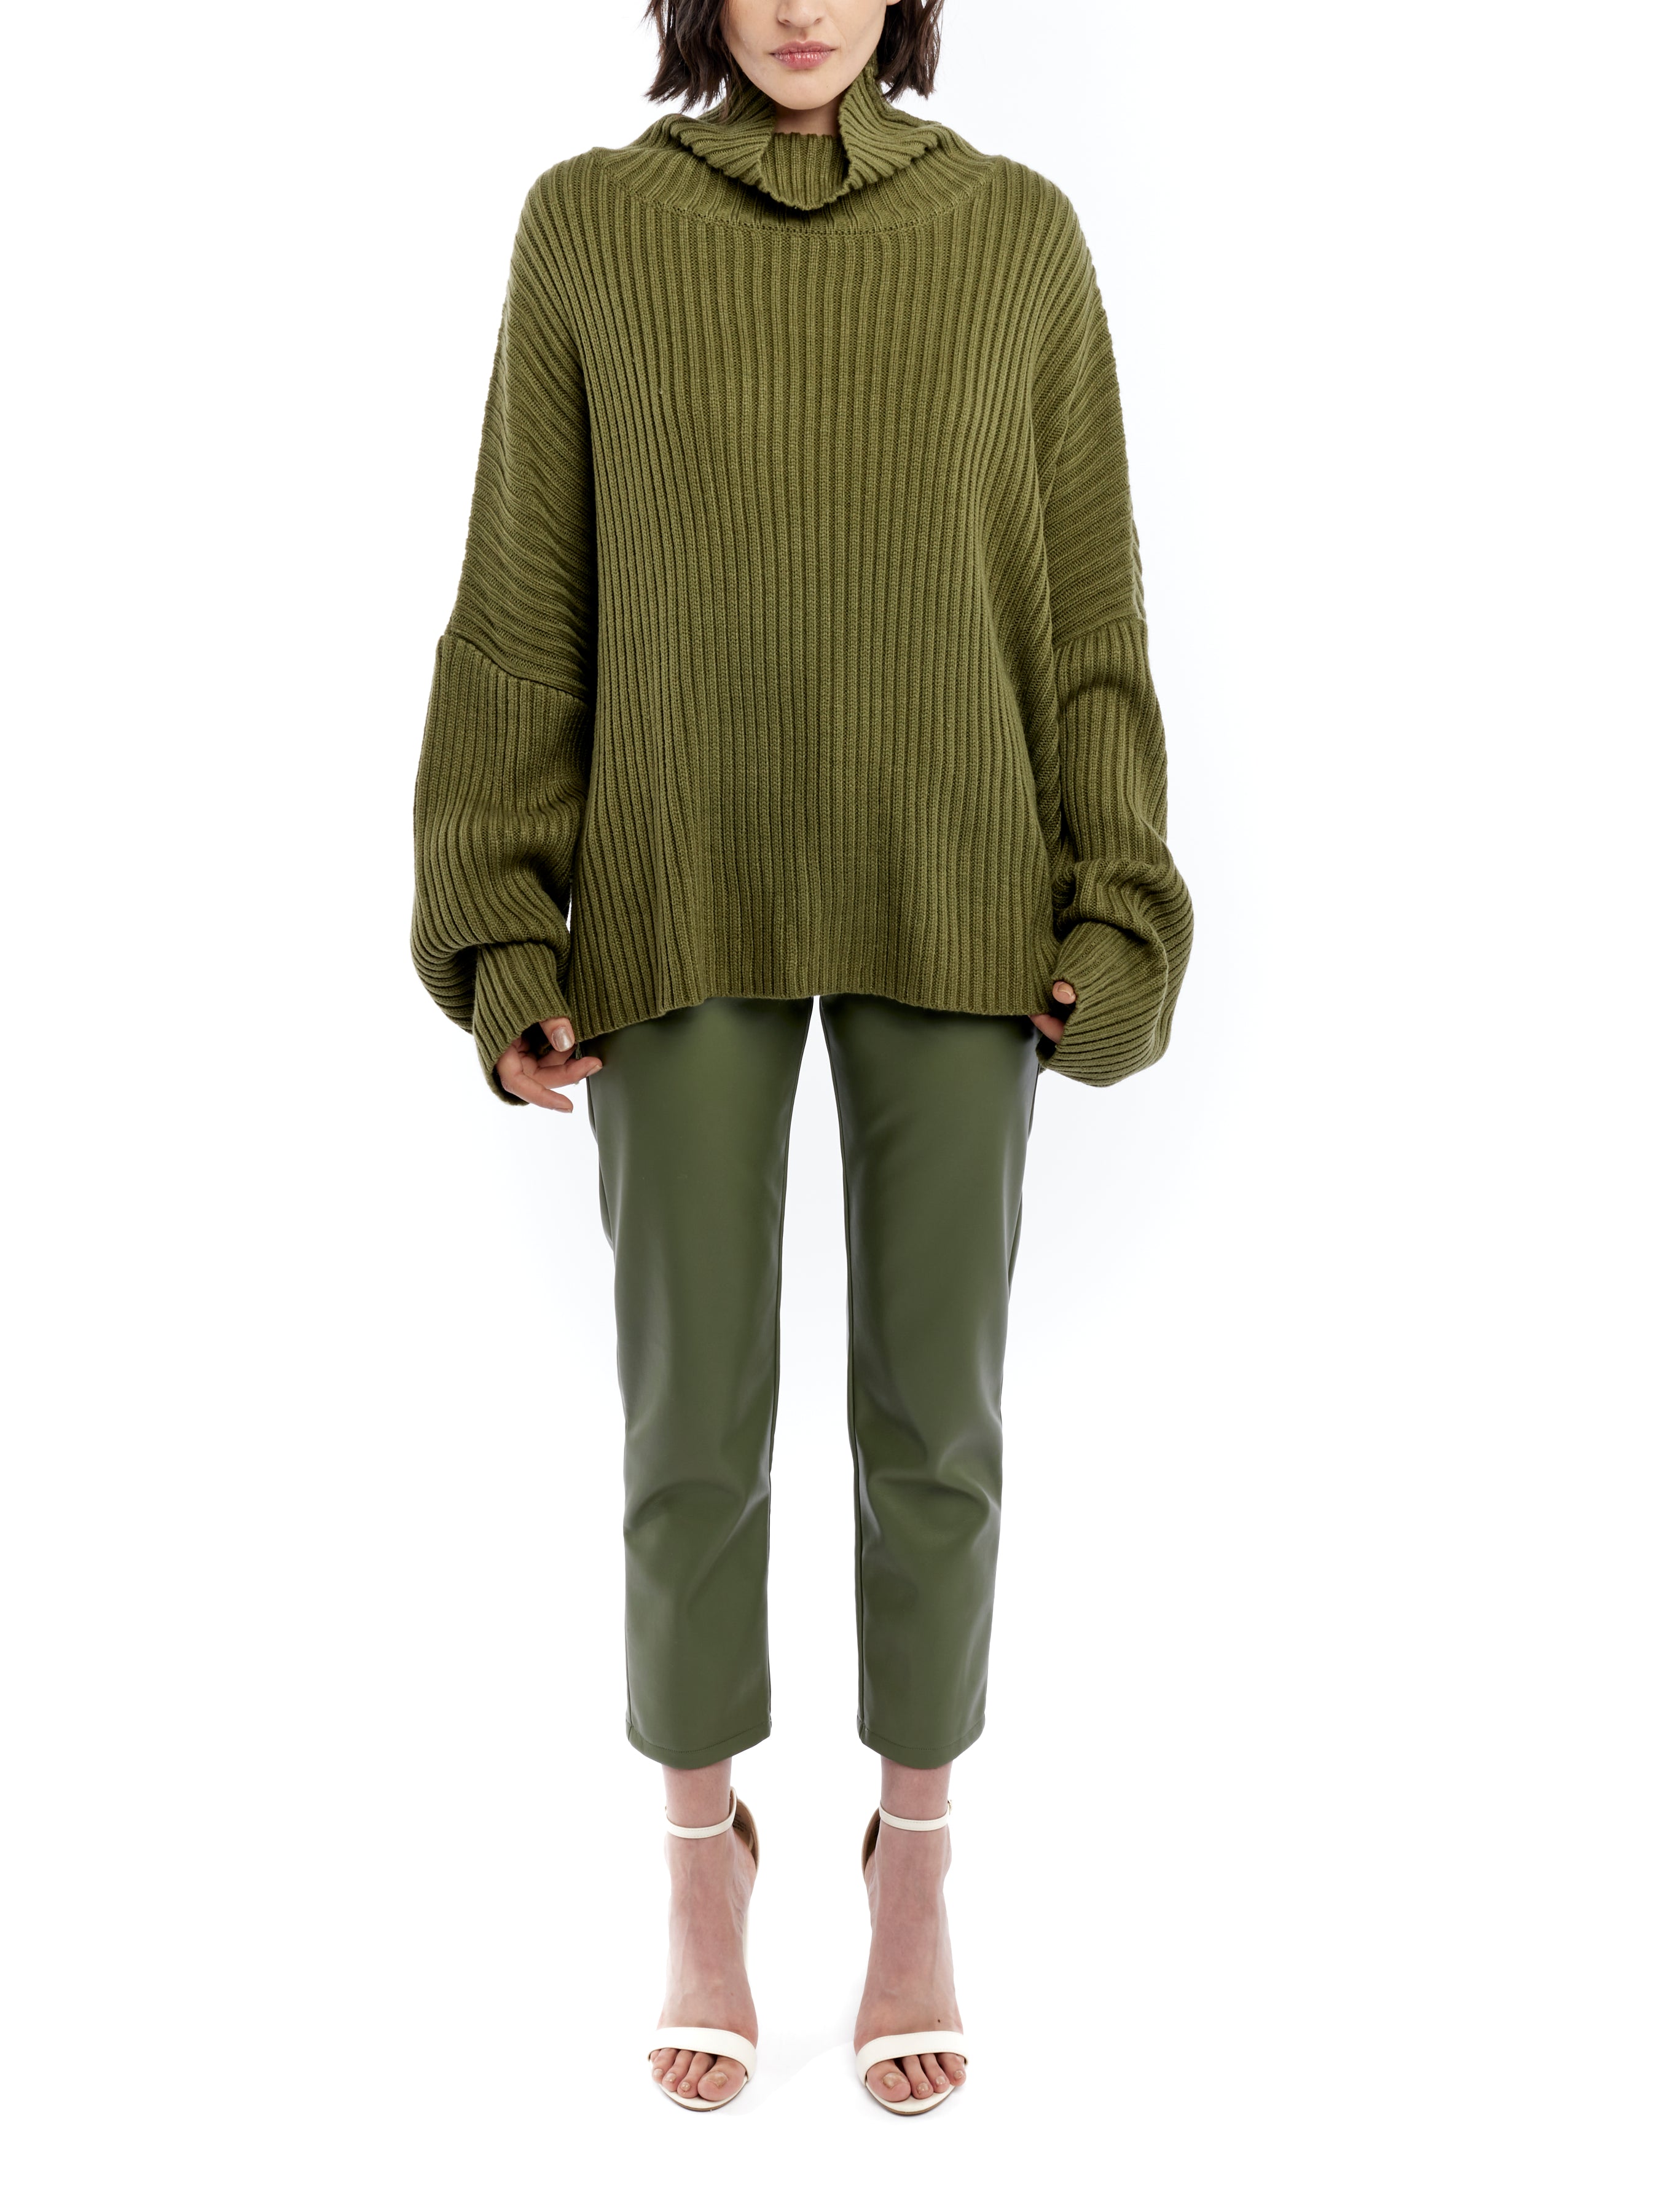 cozy, oversized sweater with ribbed detailing and comfy turtleneck in army green